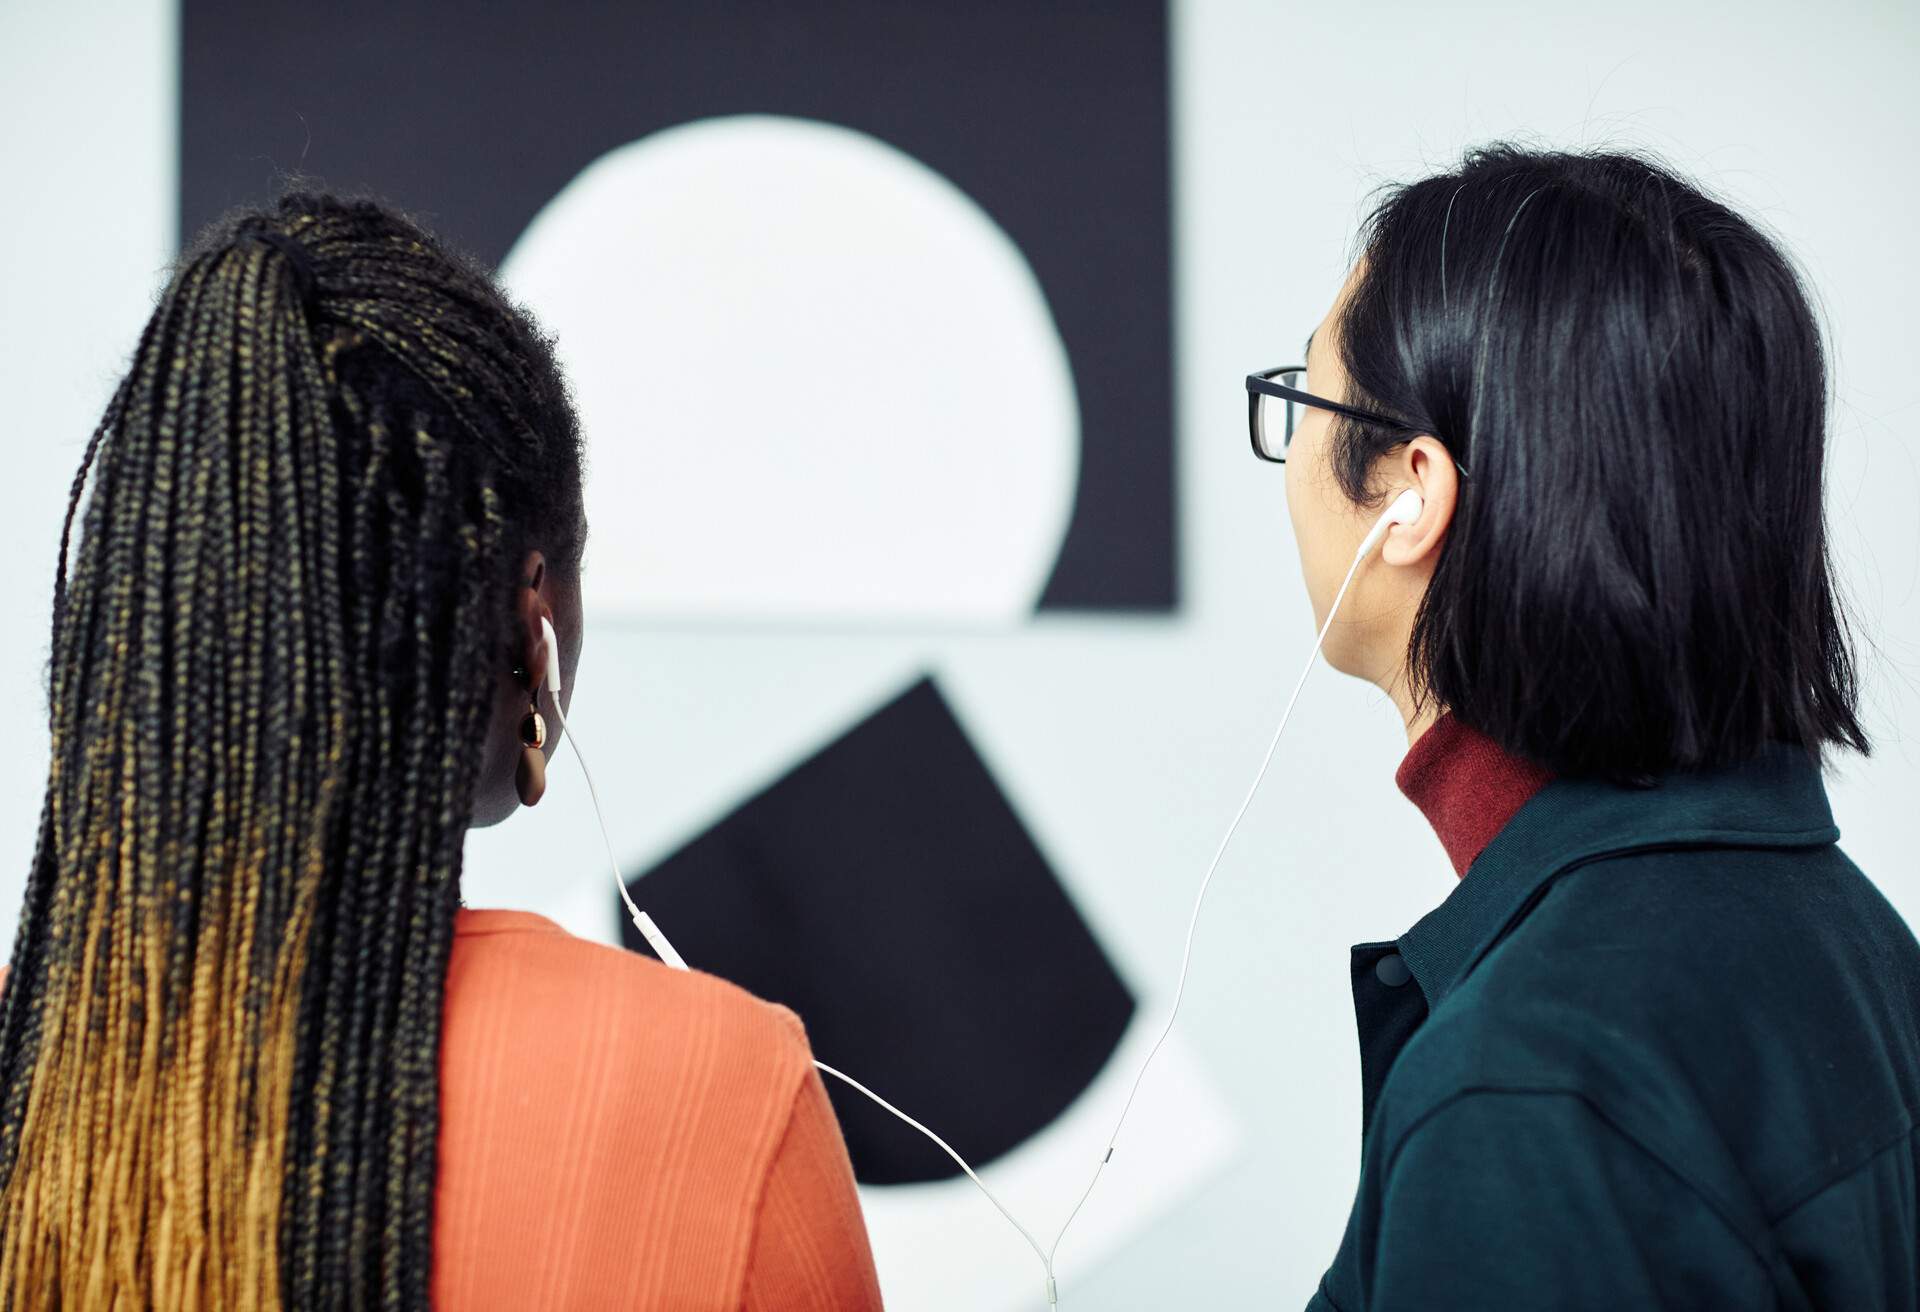 A dark-haired man and a woman with cornrow braids share an earphone while gazing at a piece of wall art.